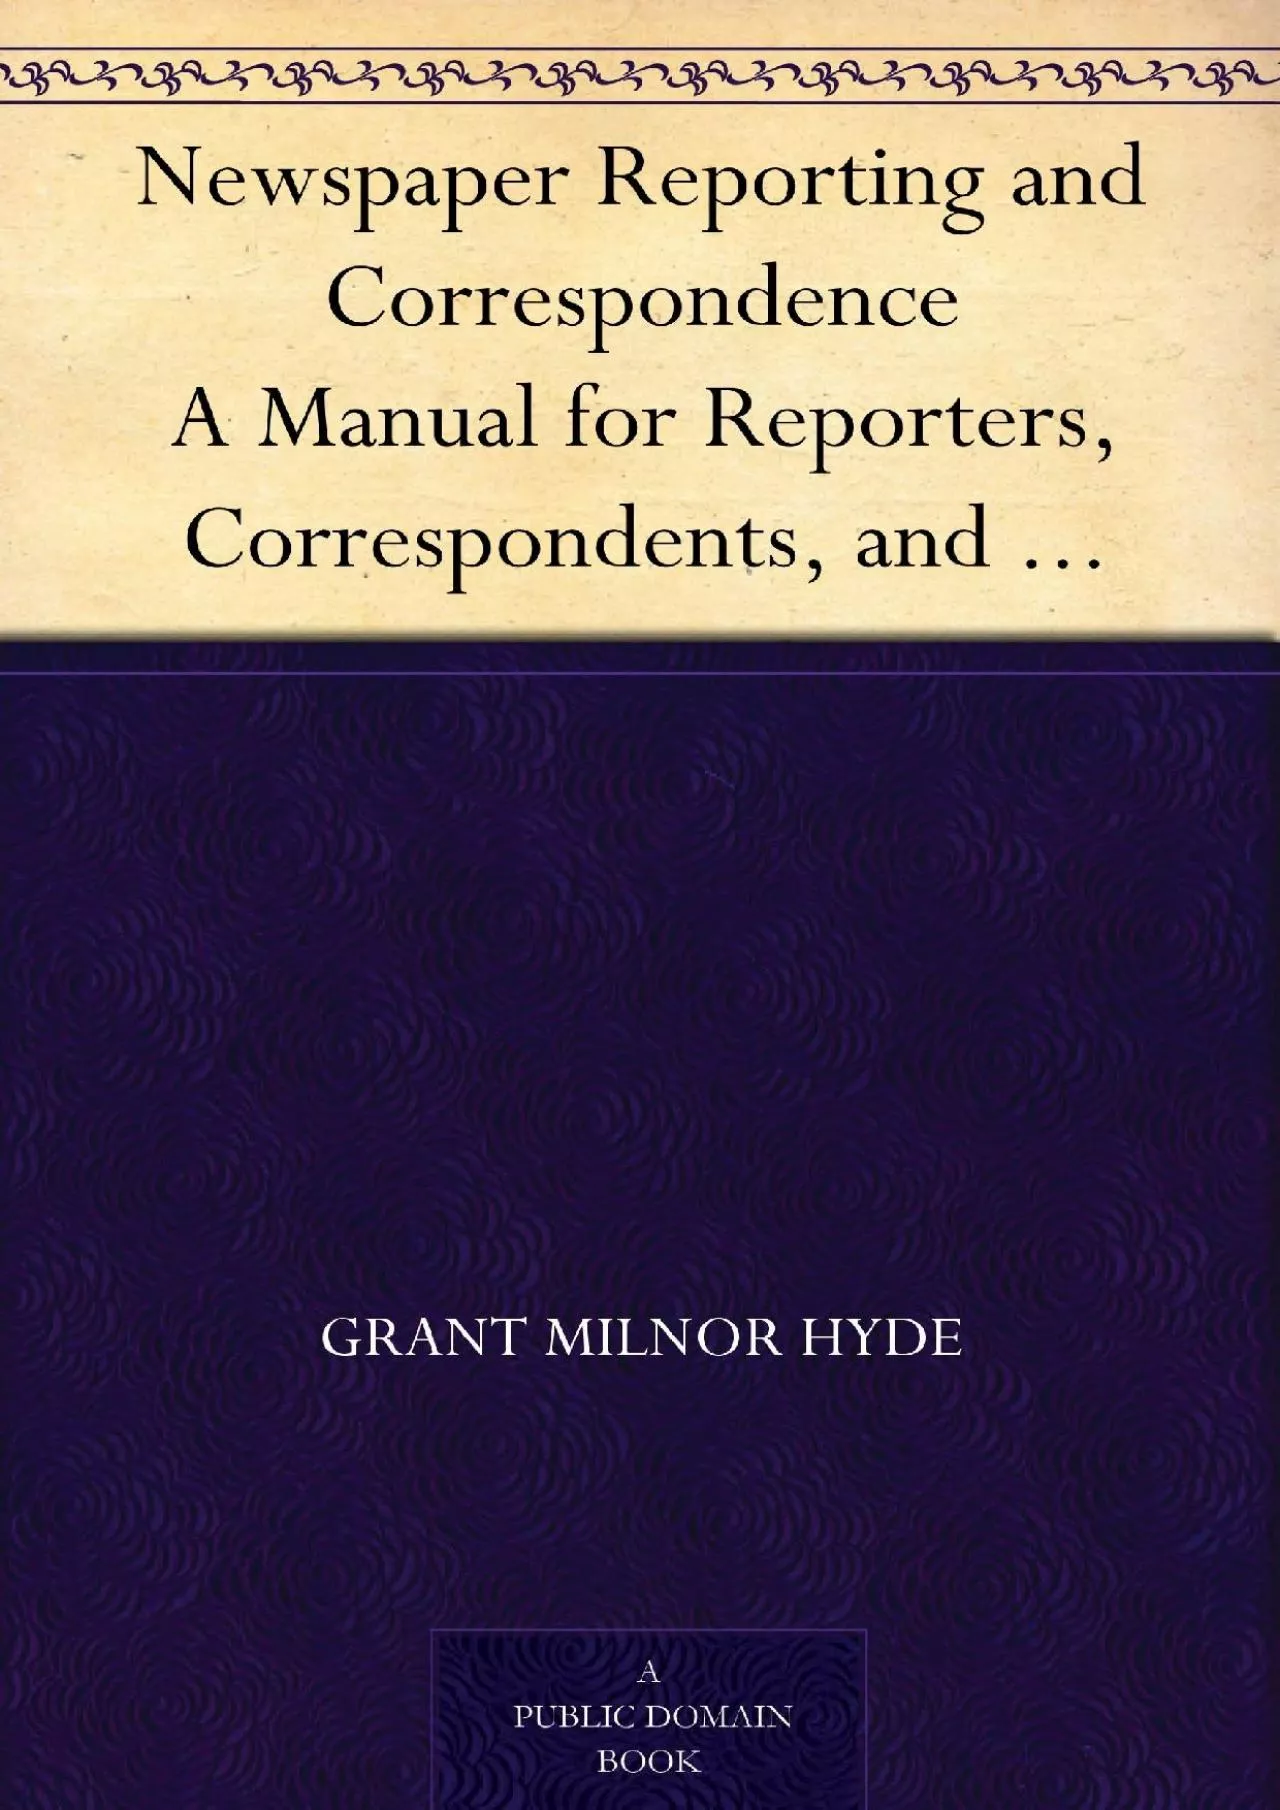 [EBOOK] Newspaper Reporting and Correspondence A Manual for Reporters, Correspondents,